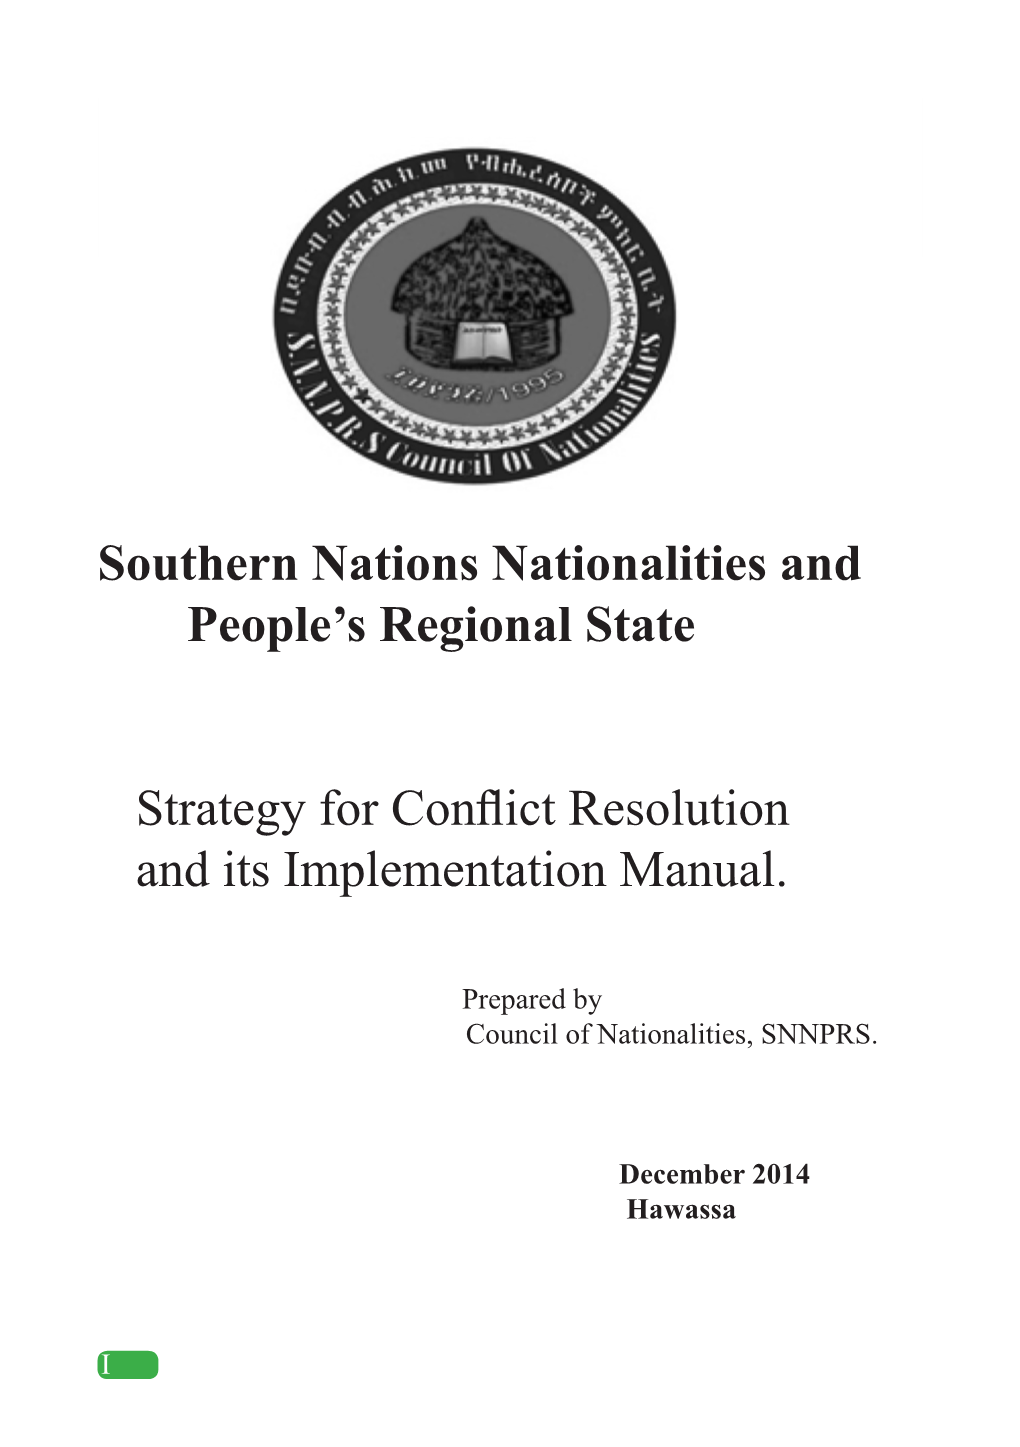 Southern Nations Nationalities and People's Regional State Strategy